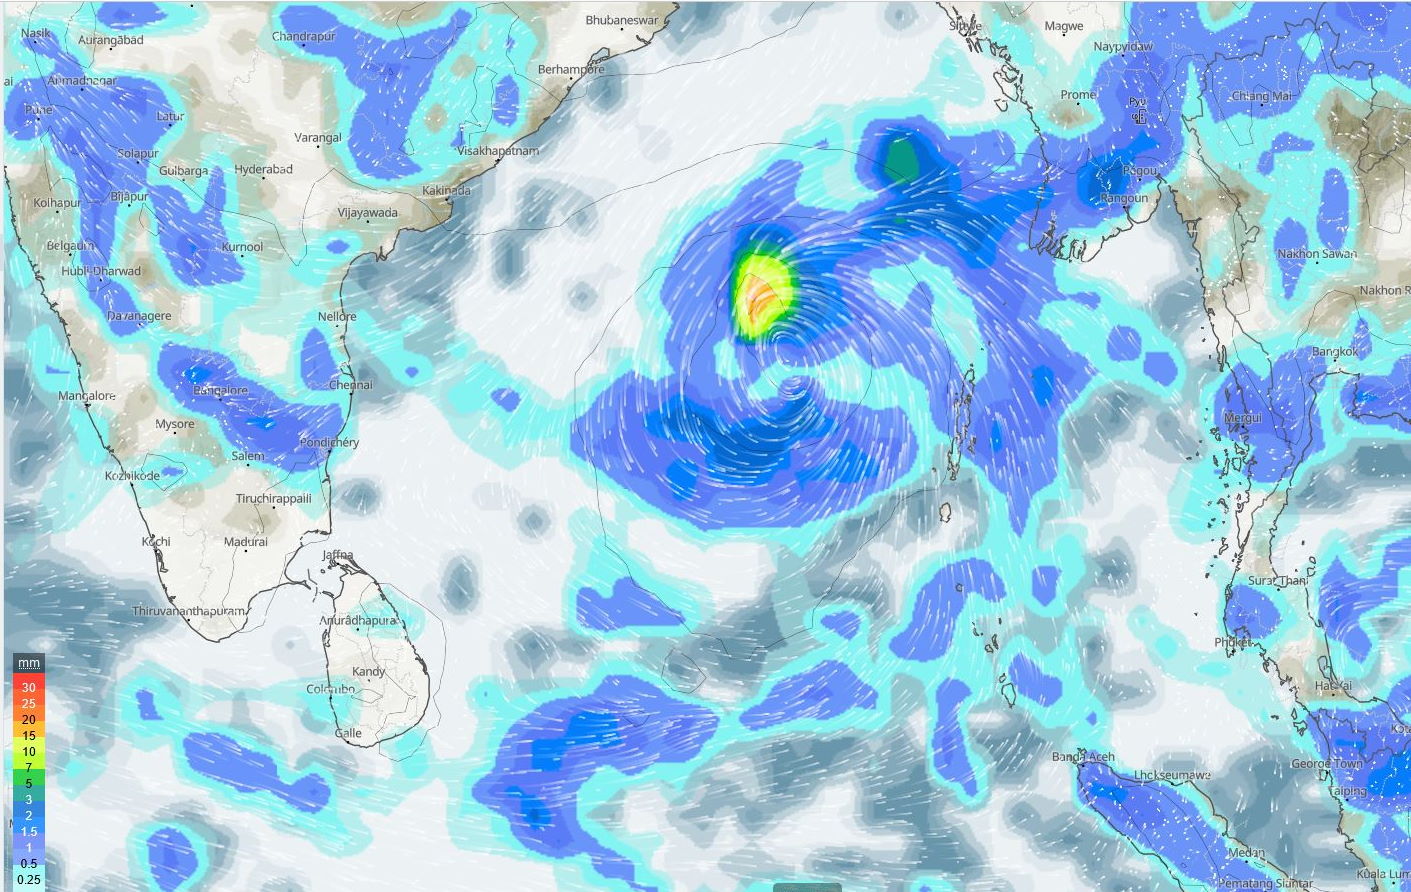 GLOBAL MODELS INDICATE STEADY DEVELOPMENT AS THE SYSTEM TRACKS OVER  THE ANDAMAN SEA, AWAY FROM LAND, AND TOWARD THE ANDAMAN ISLANDS OVER  THE NEXT 1 TO 2 DAYS.